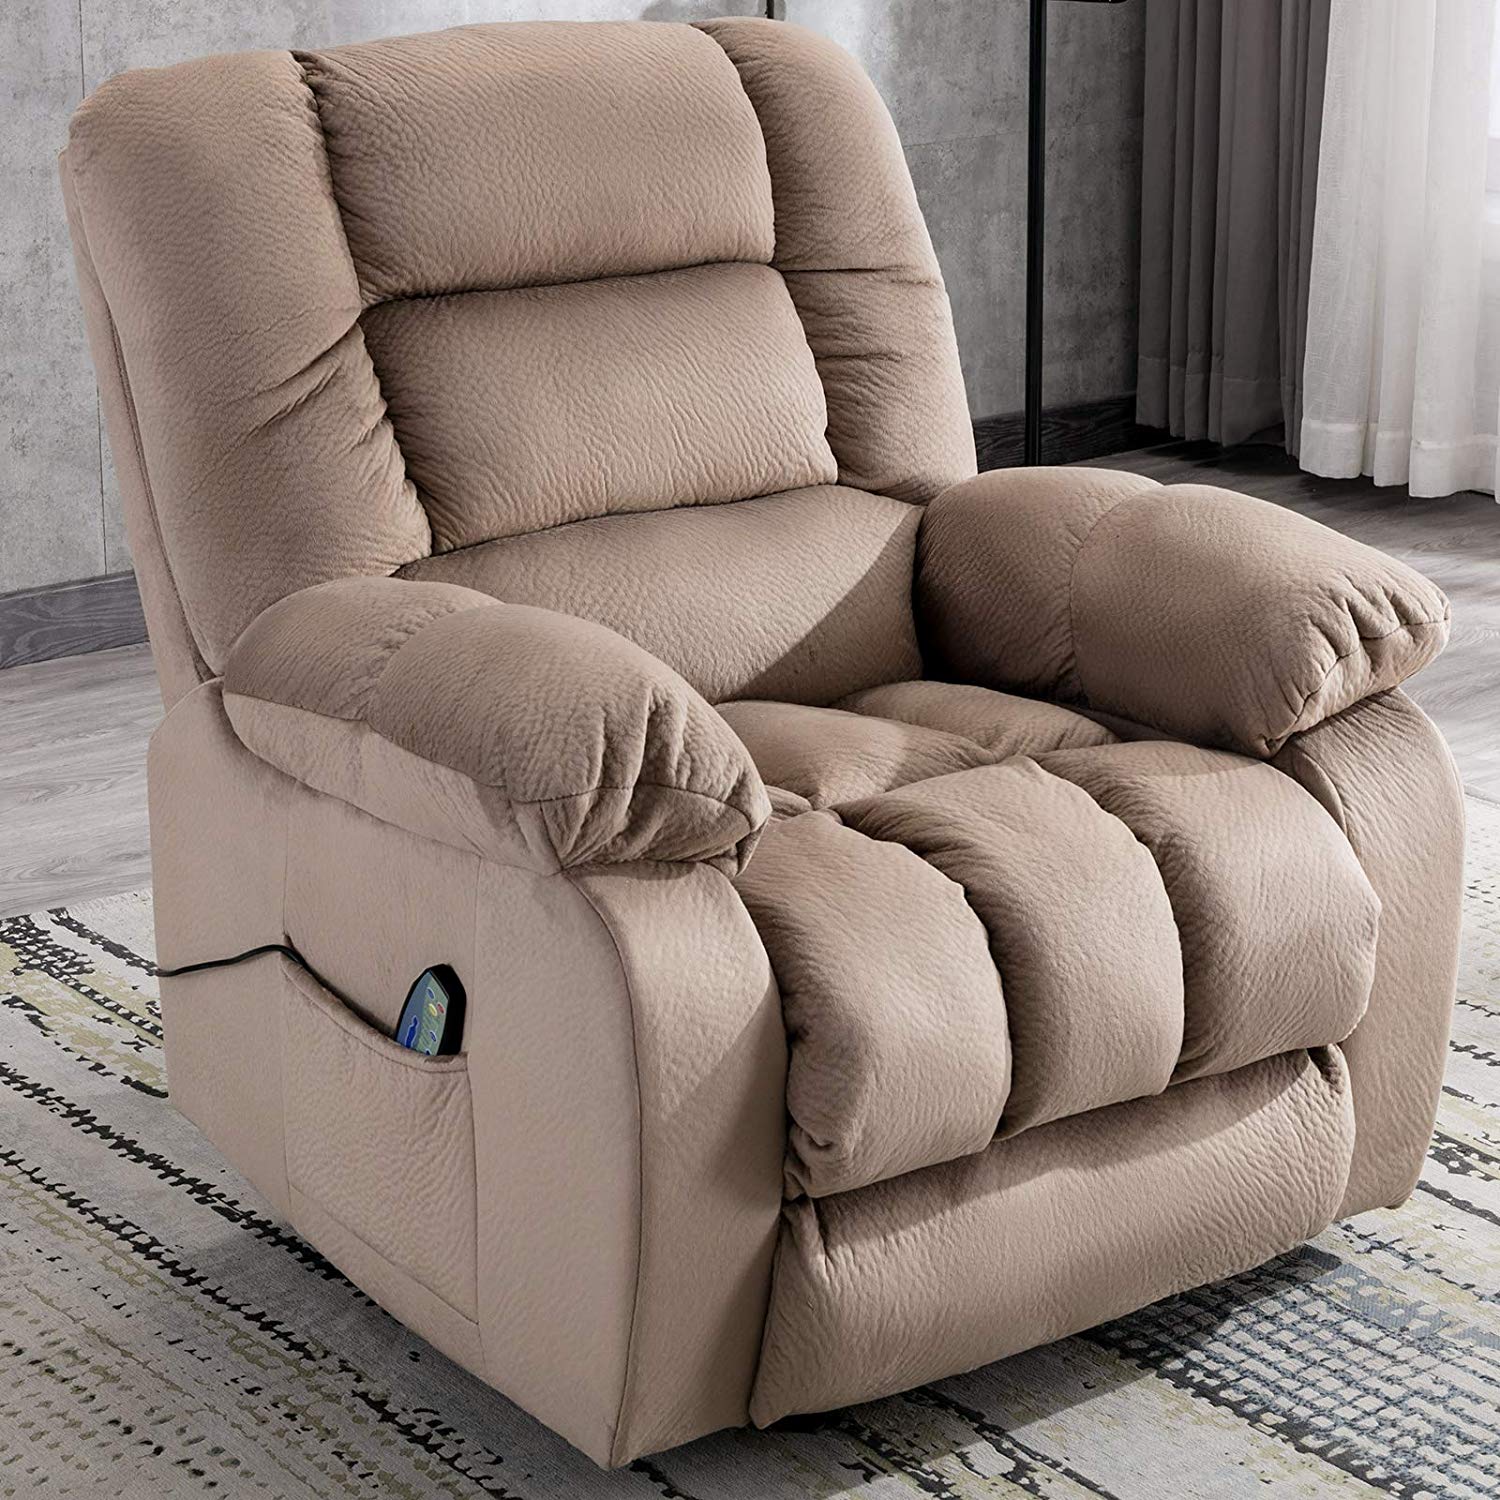 Massage Recliner Chair With Massage Heat And Vibration Lounge Chair Wrc